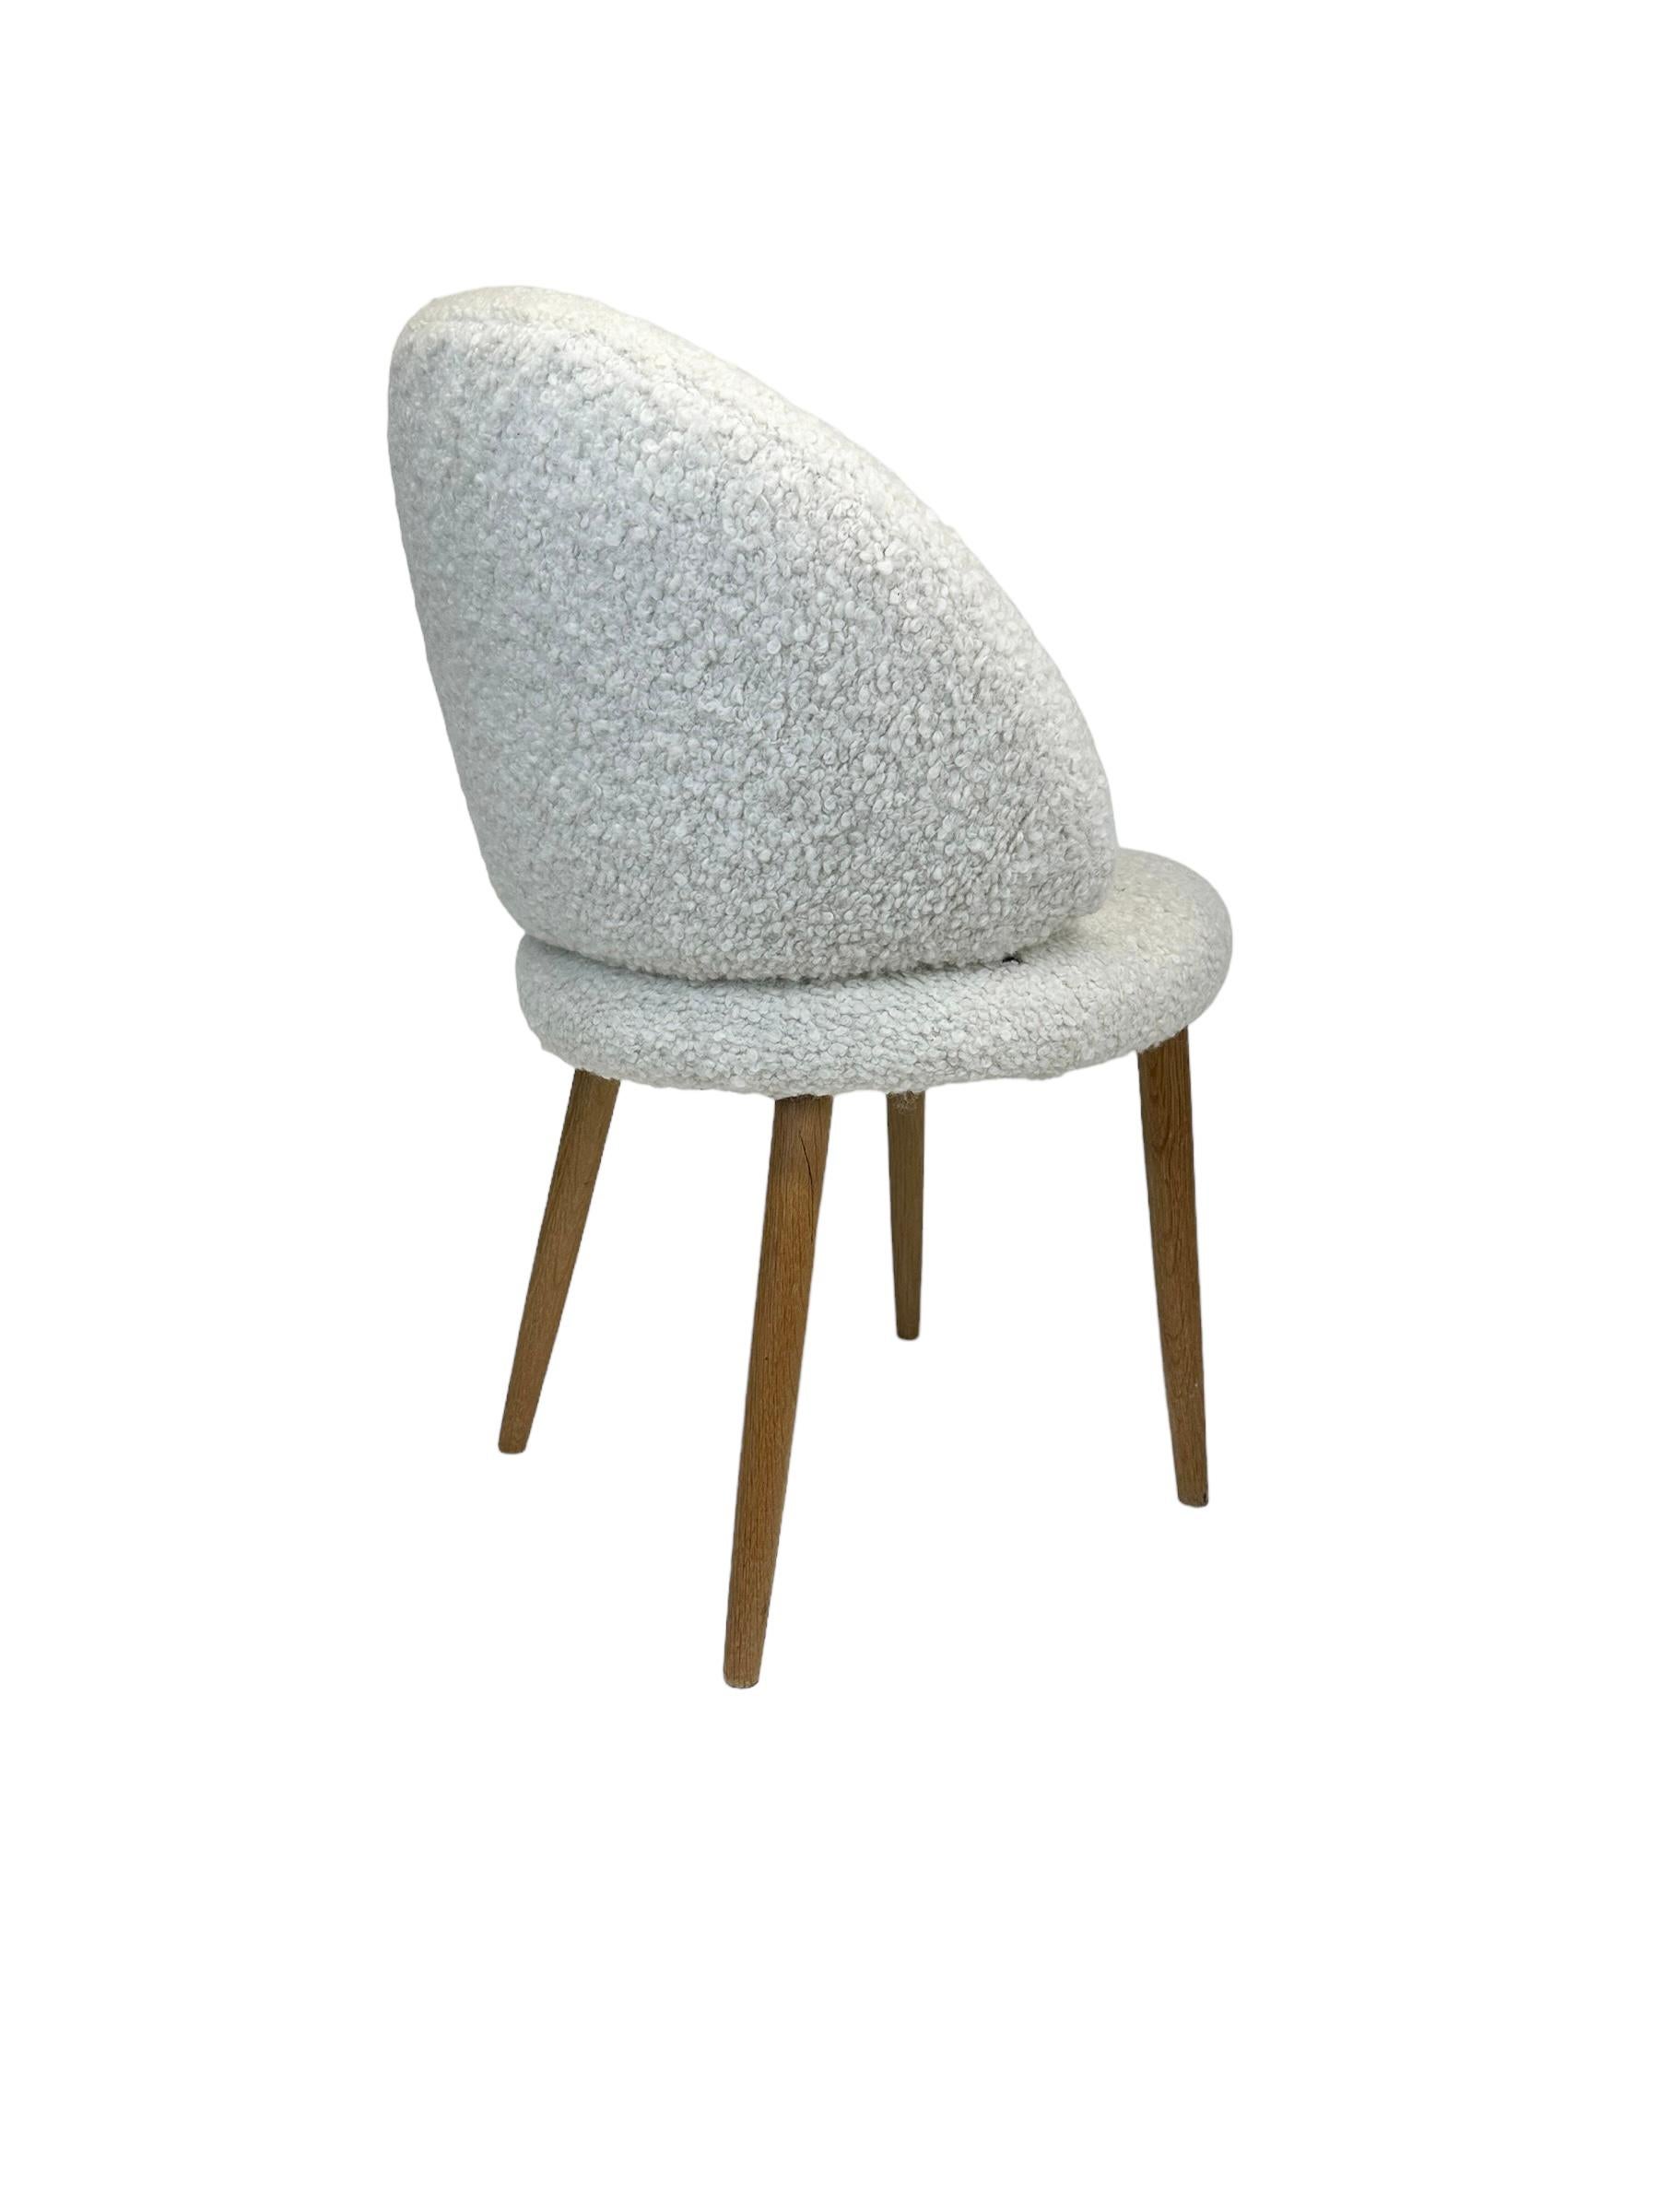 Beautiful and elegant diminutive vanity chair designed by Frode Holm. Executed in new cream bouclé textile, and comfortable supportive foam seat and back, with blonde solid wooden legs in satin lacquer finish. In good condition and presents well. In